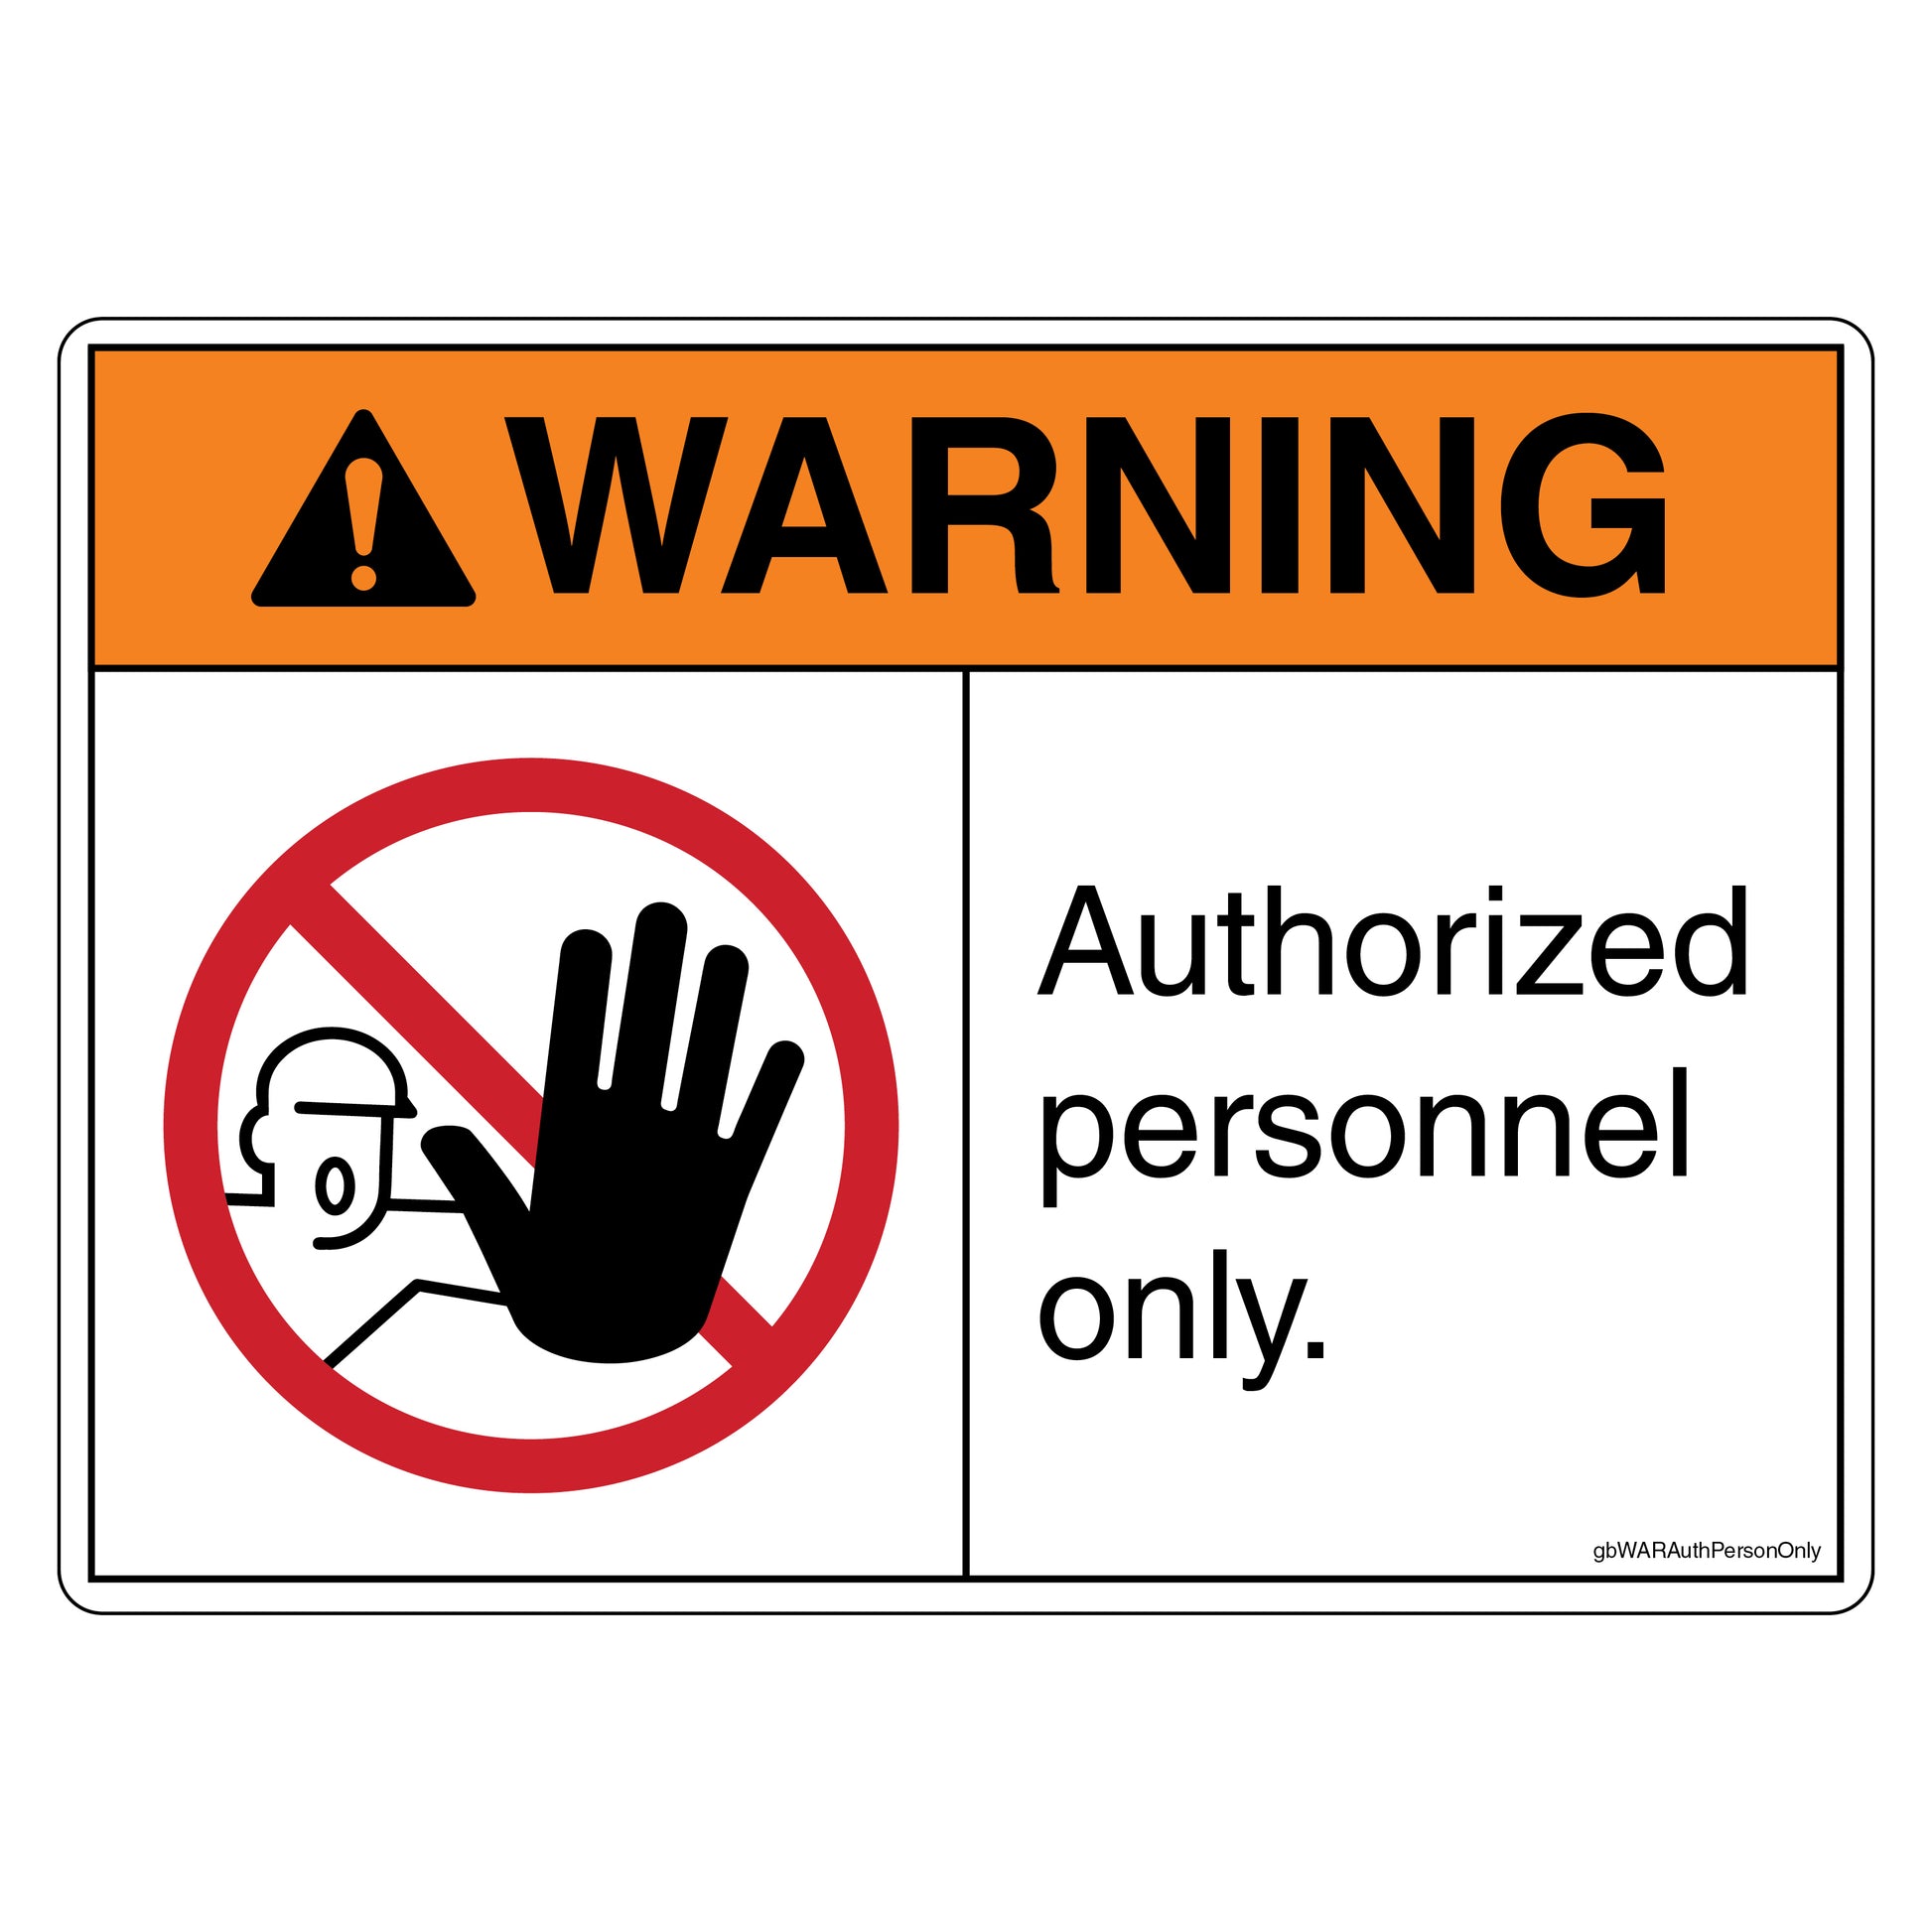 Warning Authorized Personnel Only Decal. 4 inches by 3 inches in size.